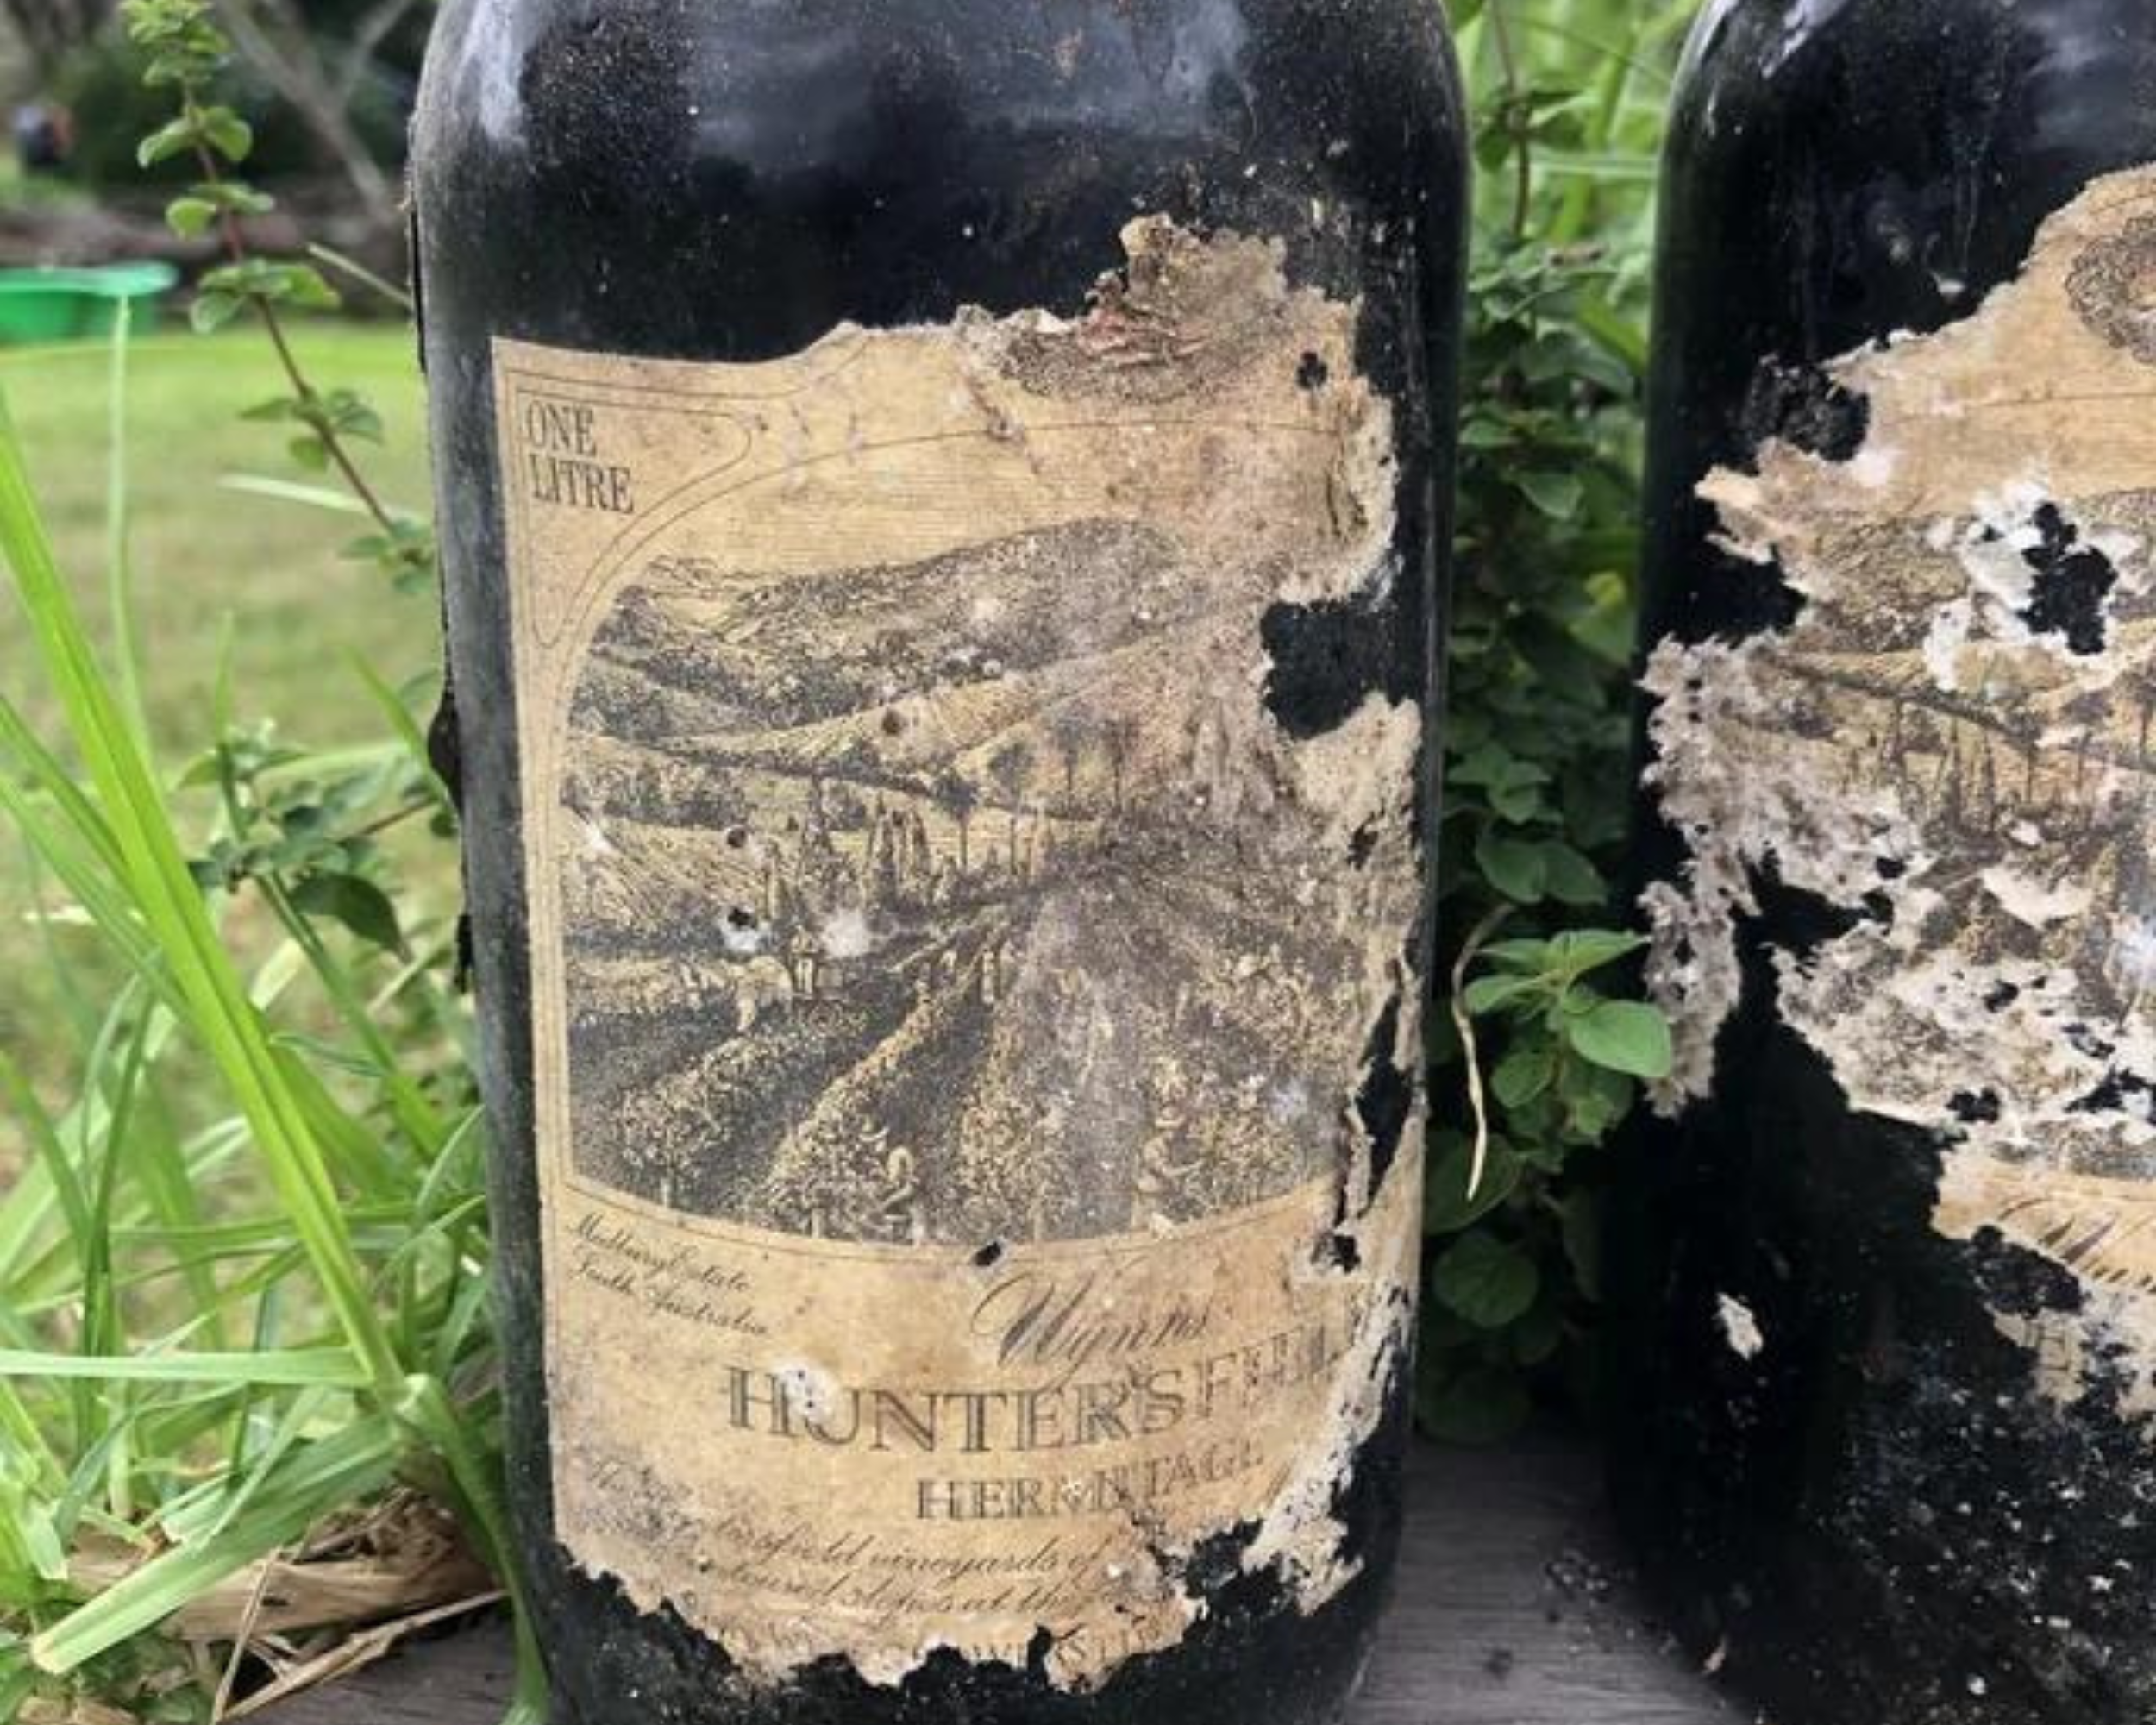 Woman Stumbles on Trove of Vintage Wine Under House While Spring Cleaning